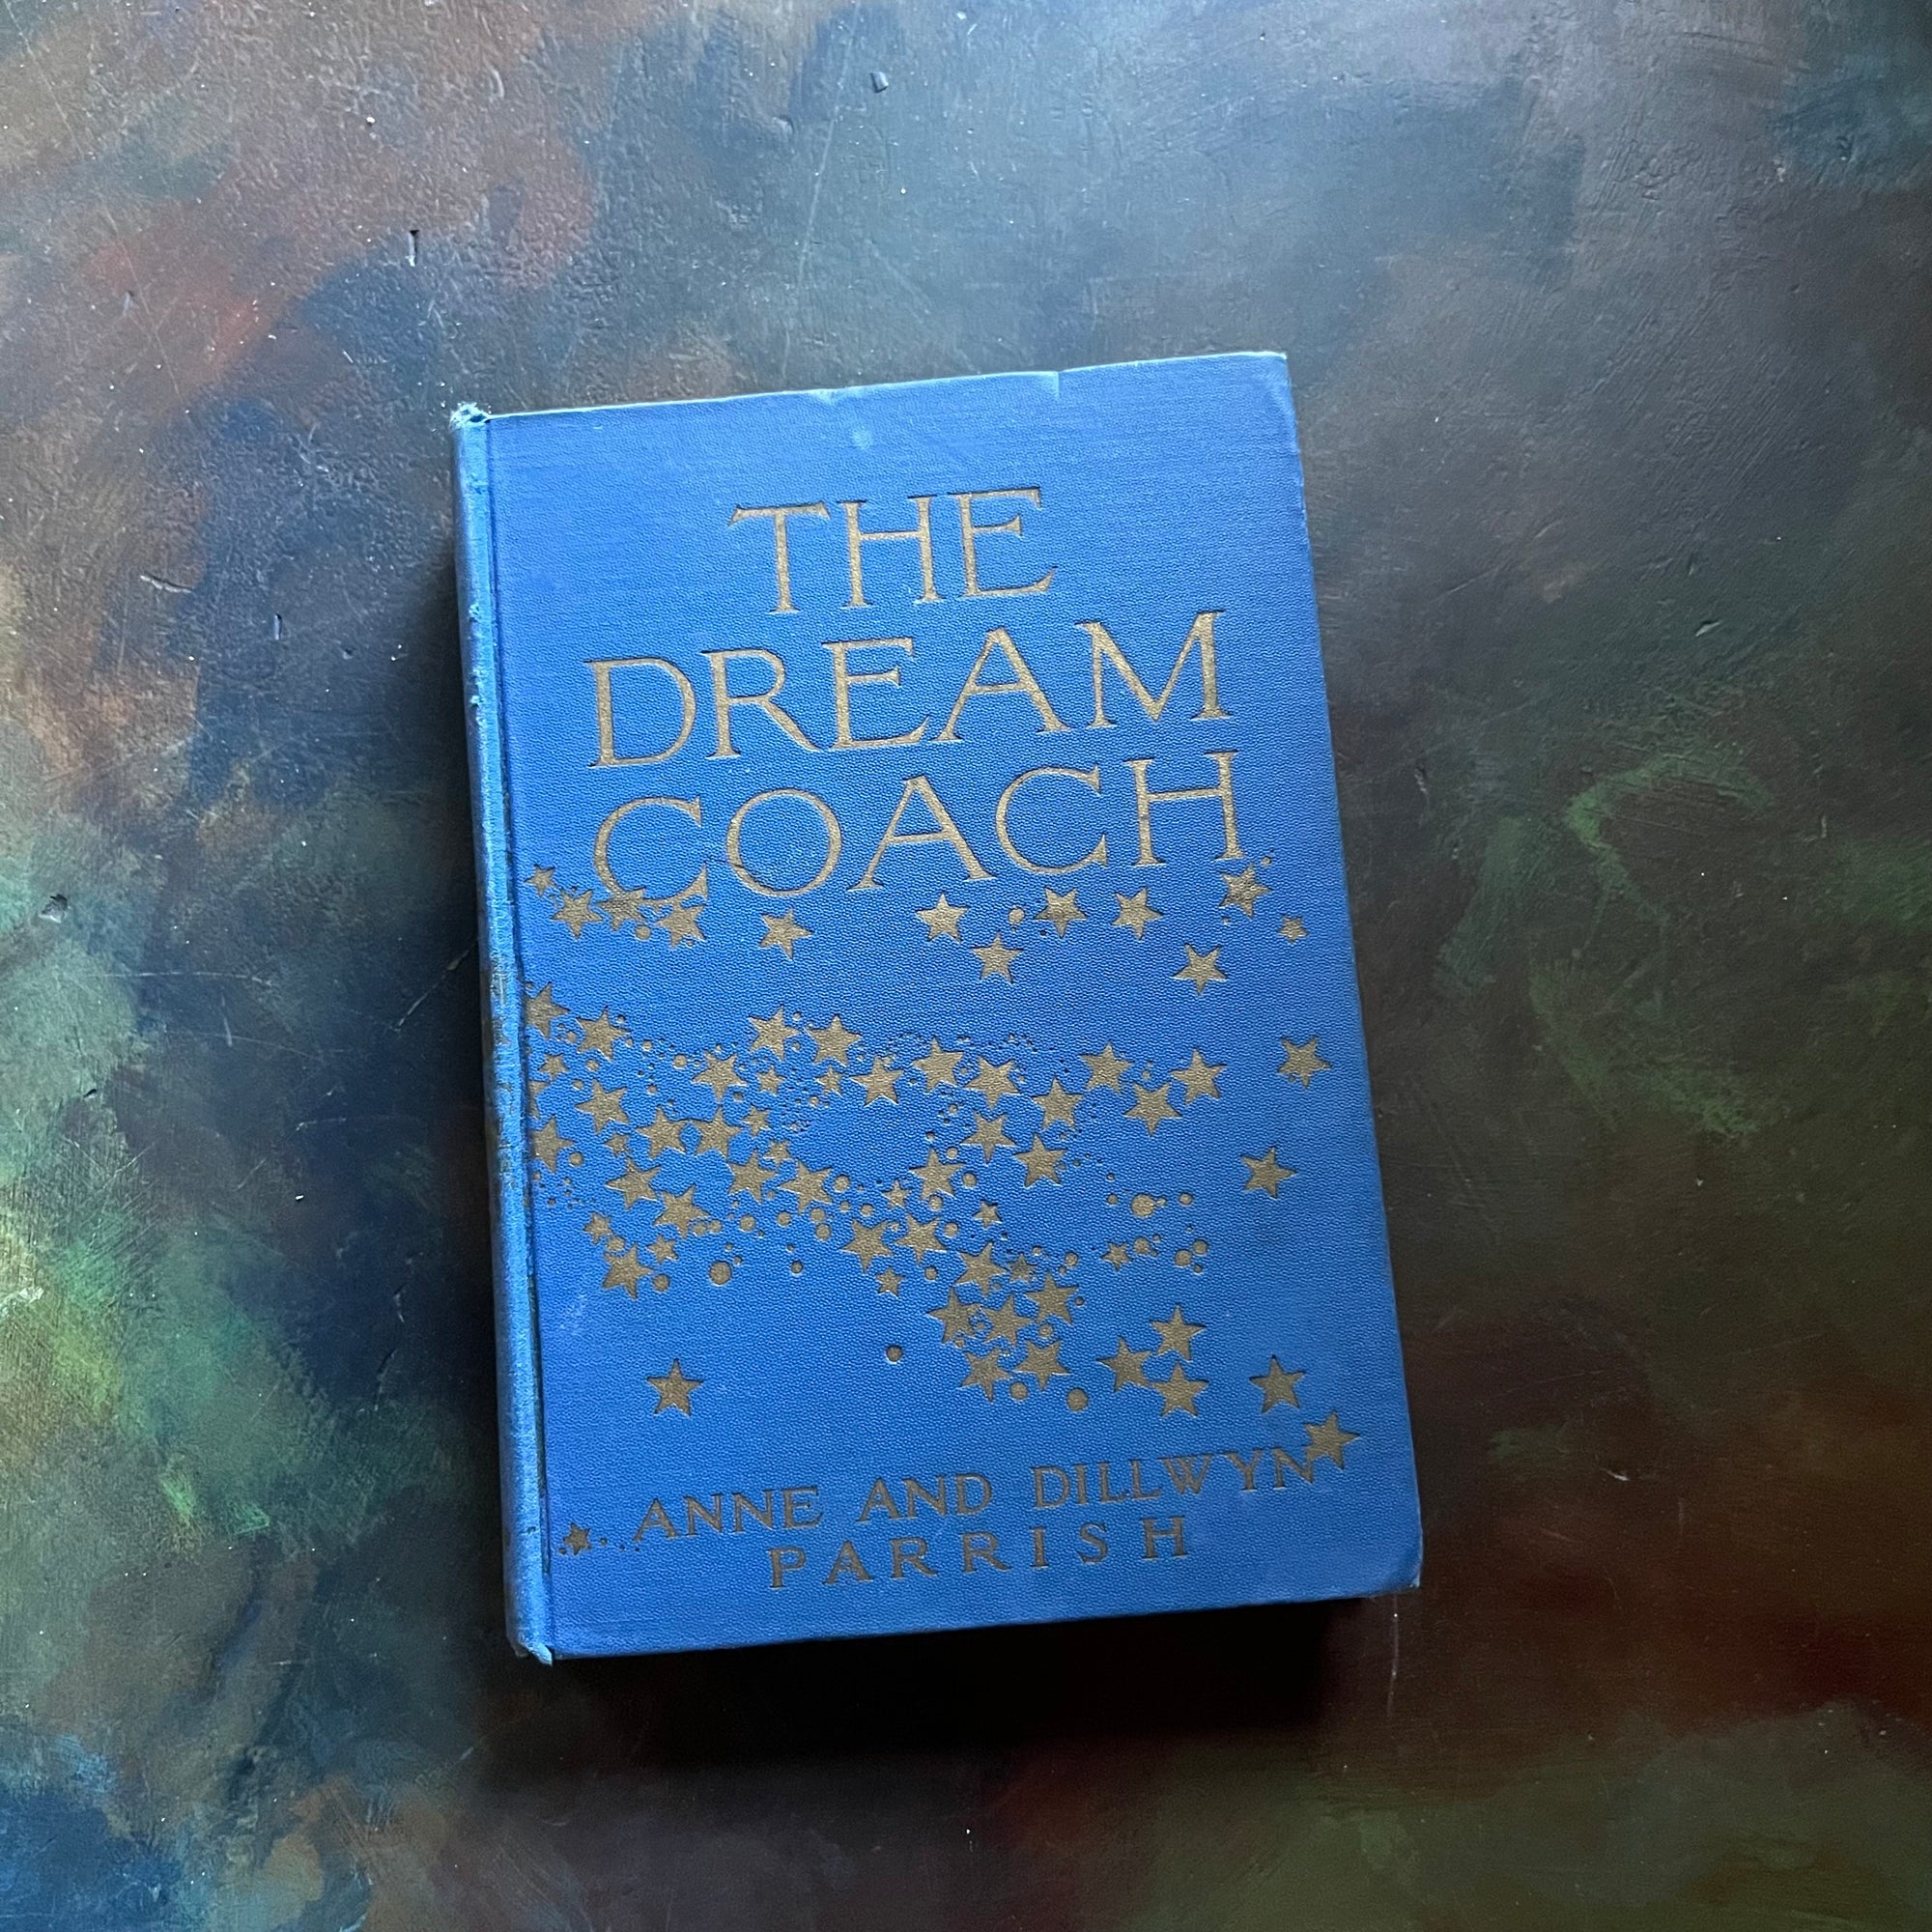 The Dream Coach written by Anne and Dillwyn Parrish-vintage children's short stories book-view of the embossed front cover with a blue background & gold stars & title